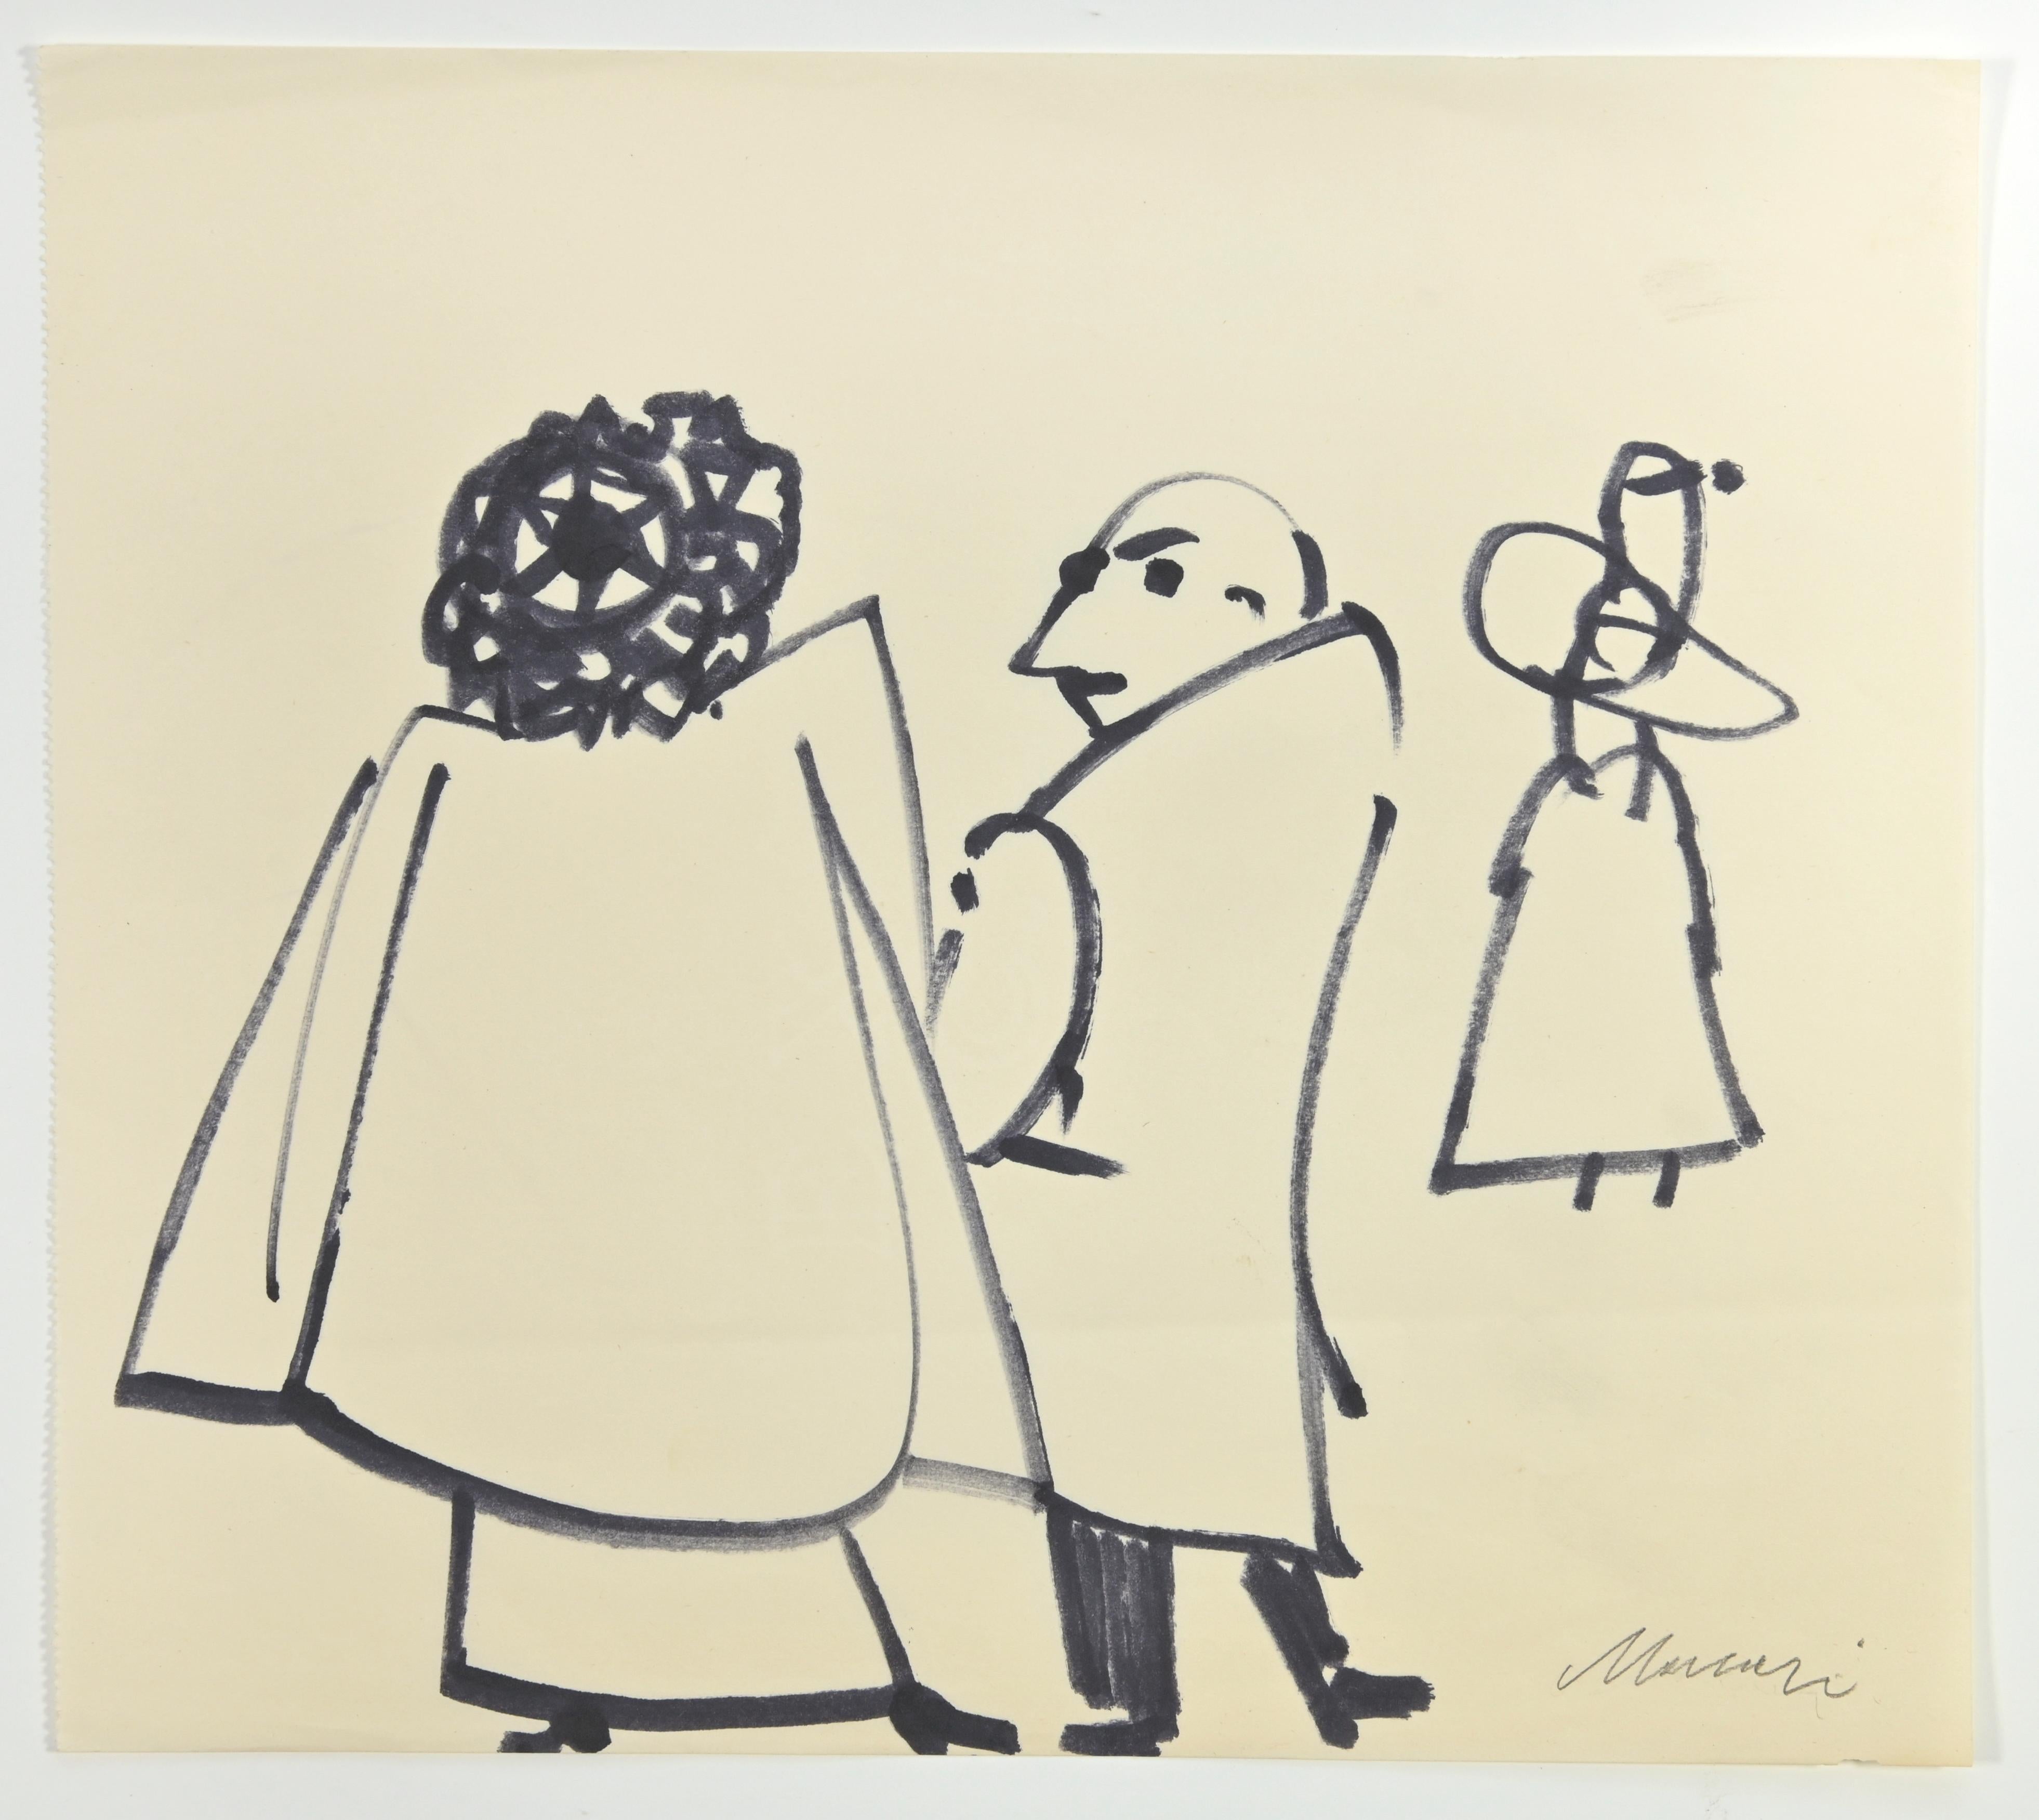 Figures is a black marker Drawing realized by Mino Maccari  (1924-1989) in the 1960s.

Hand-signed on the lower.

Good conditions.

Mino Maccari (Siena, 1924-Rome, June 16, 1989) was an Italian writer, painter, engraver and journalist, winner of the